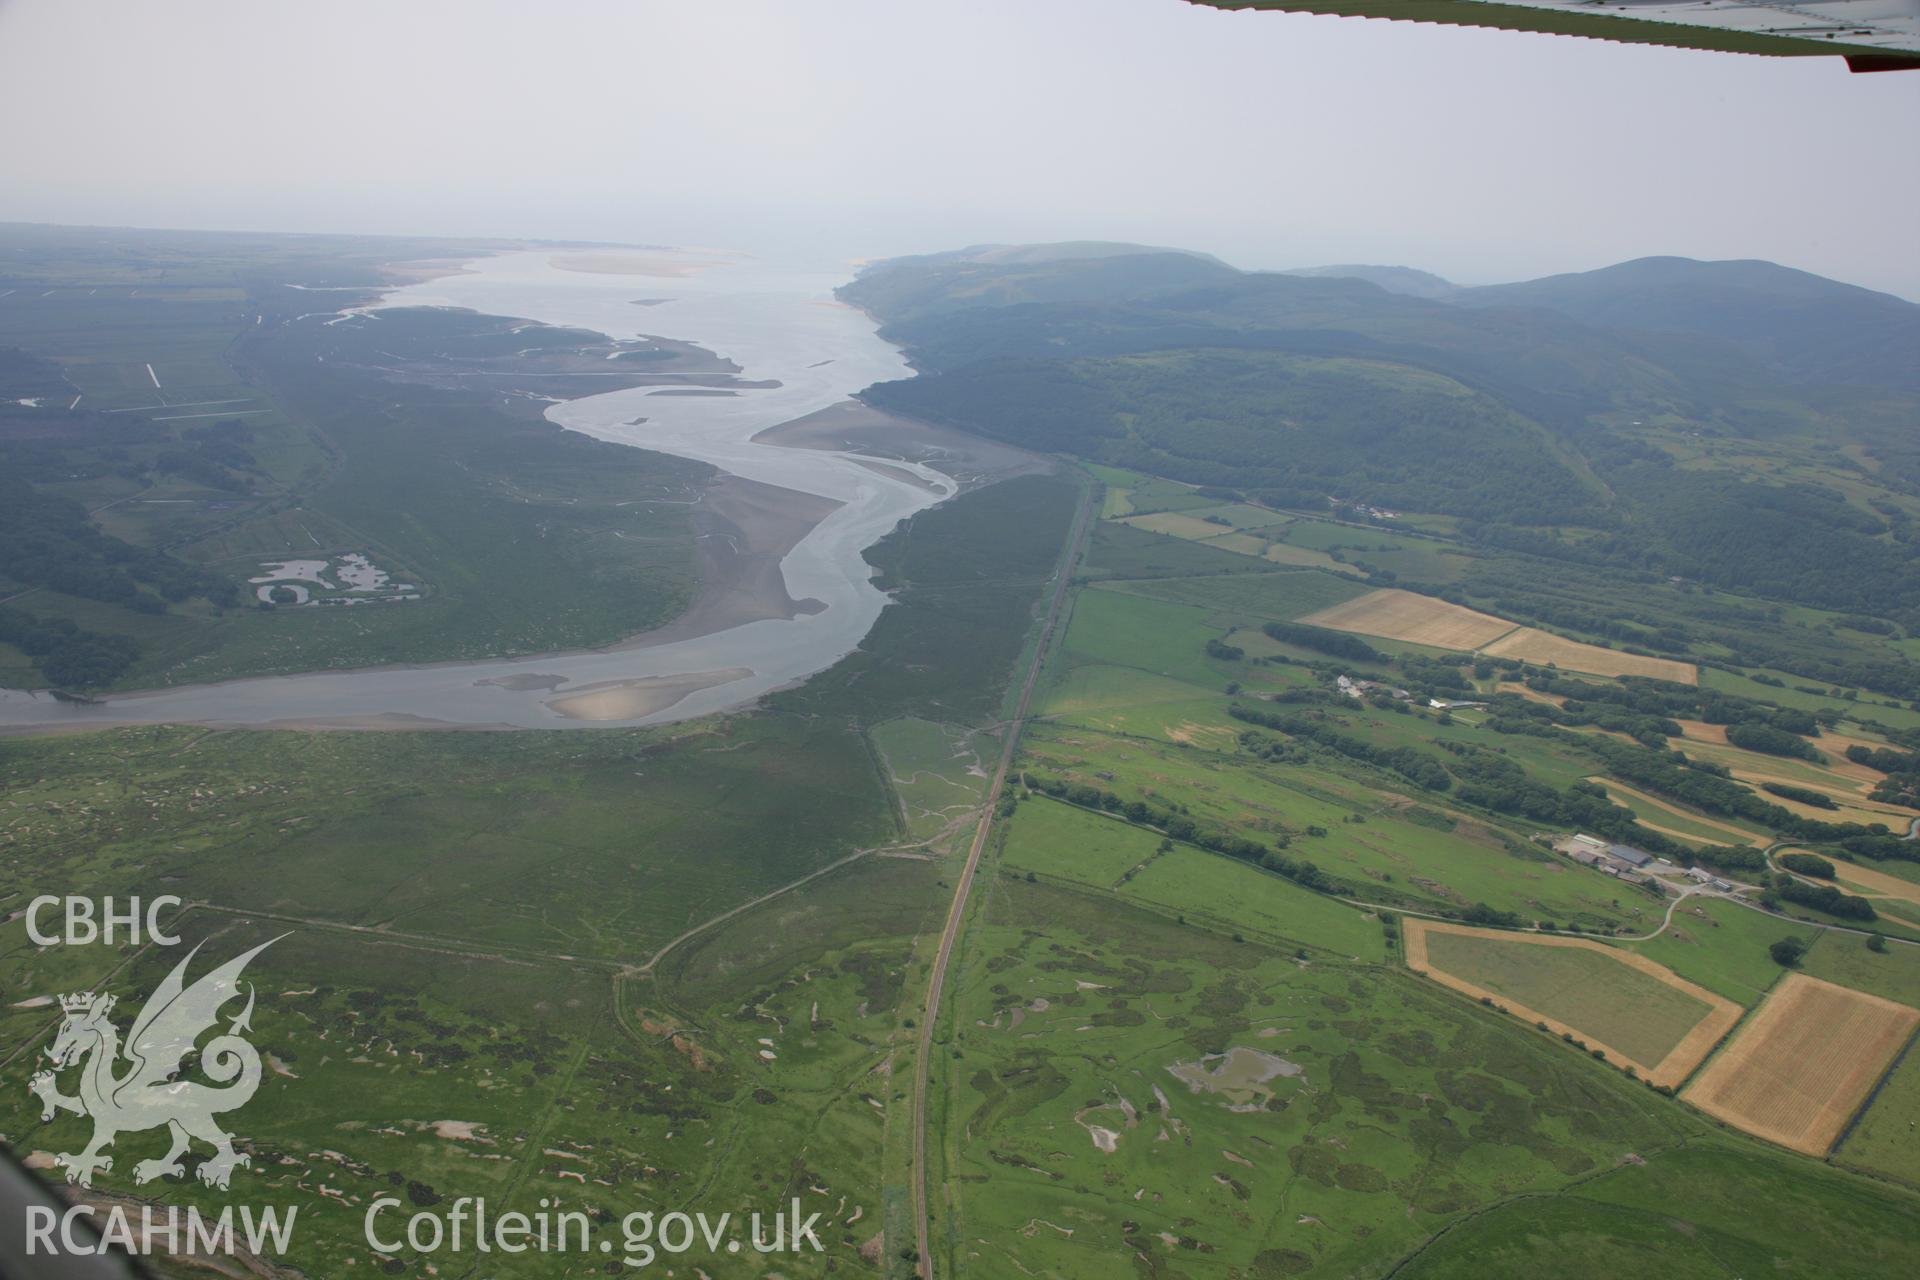 RCAHMW colour oblique aerial photograph of Dyfi Valley. Taken on 04 July 2006 by Toby Driver.